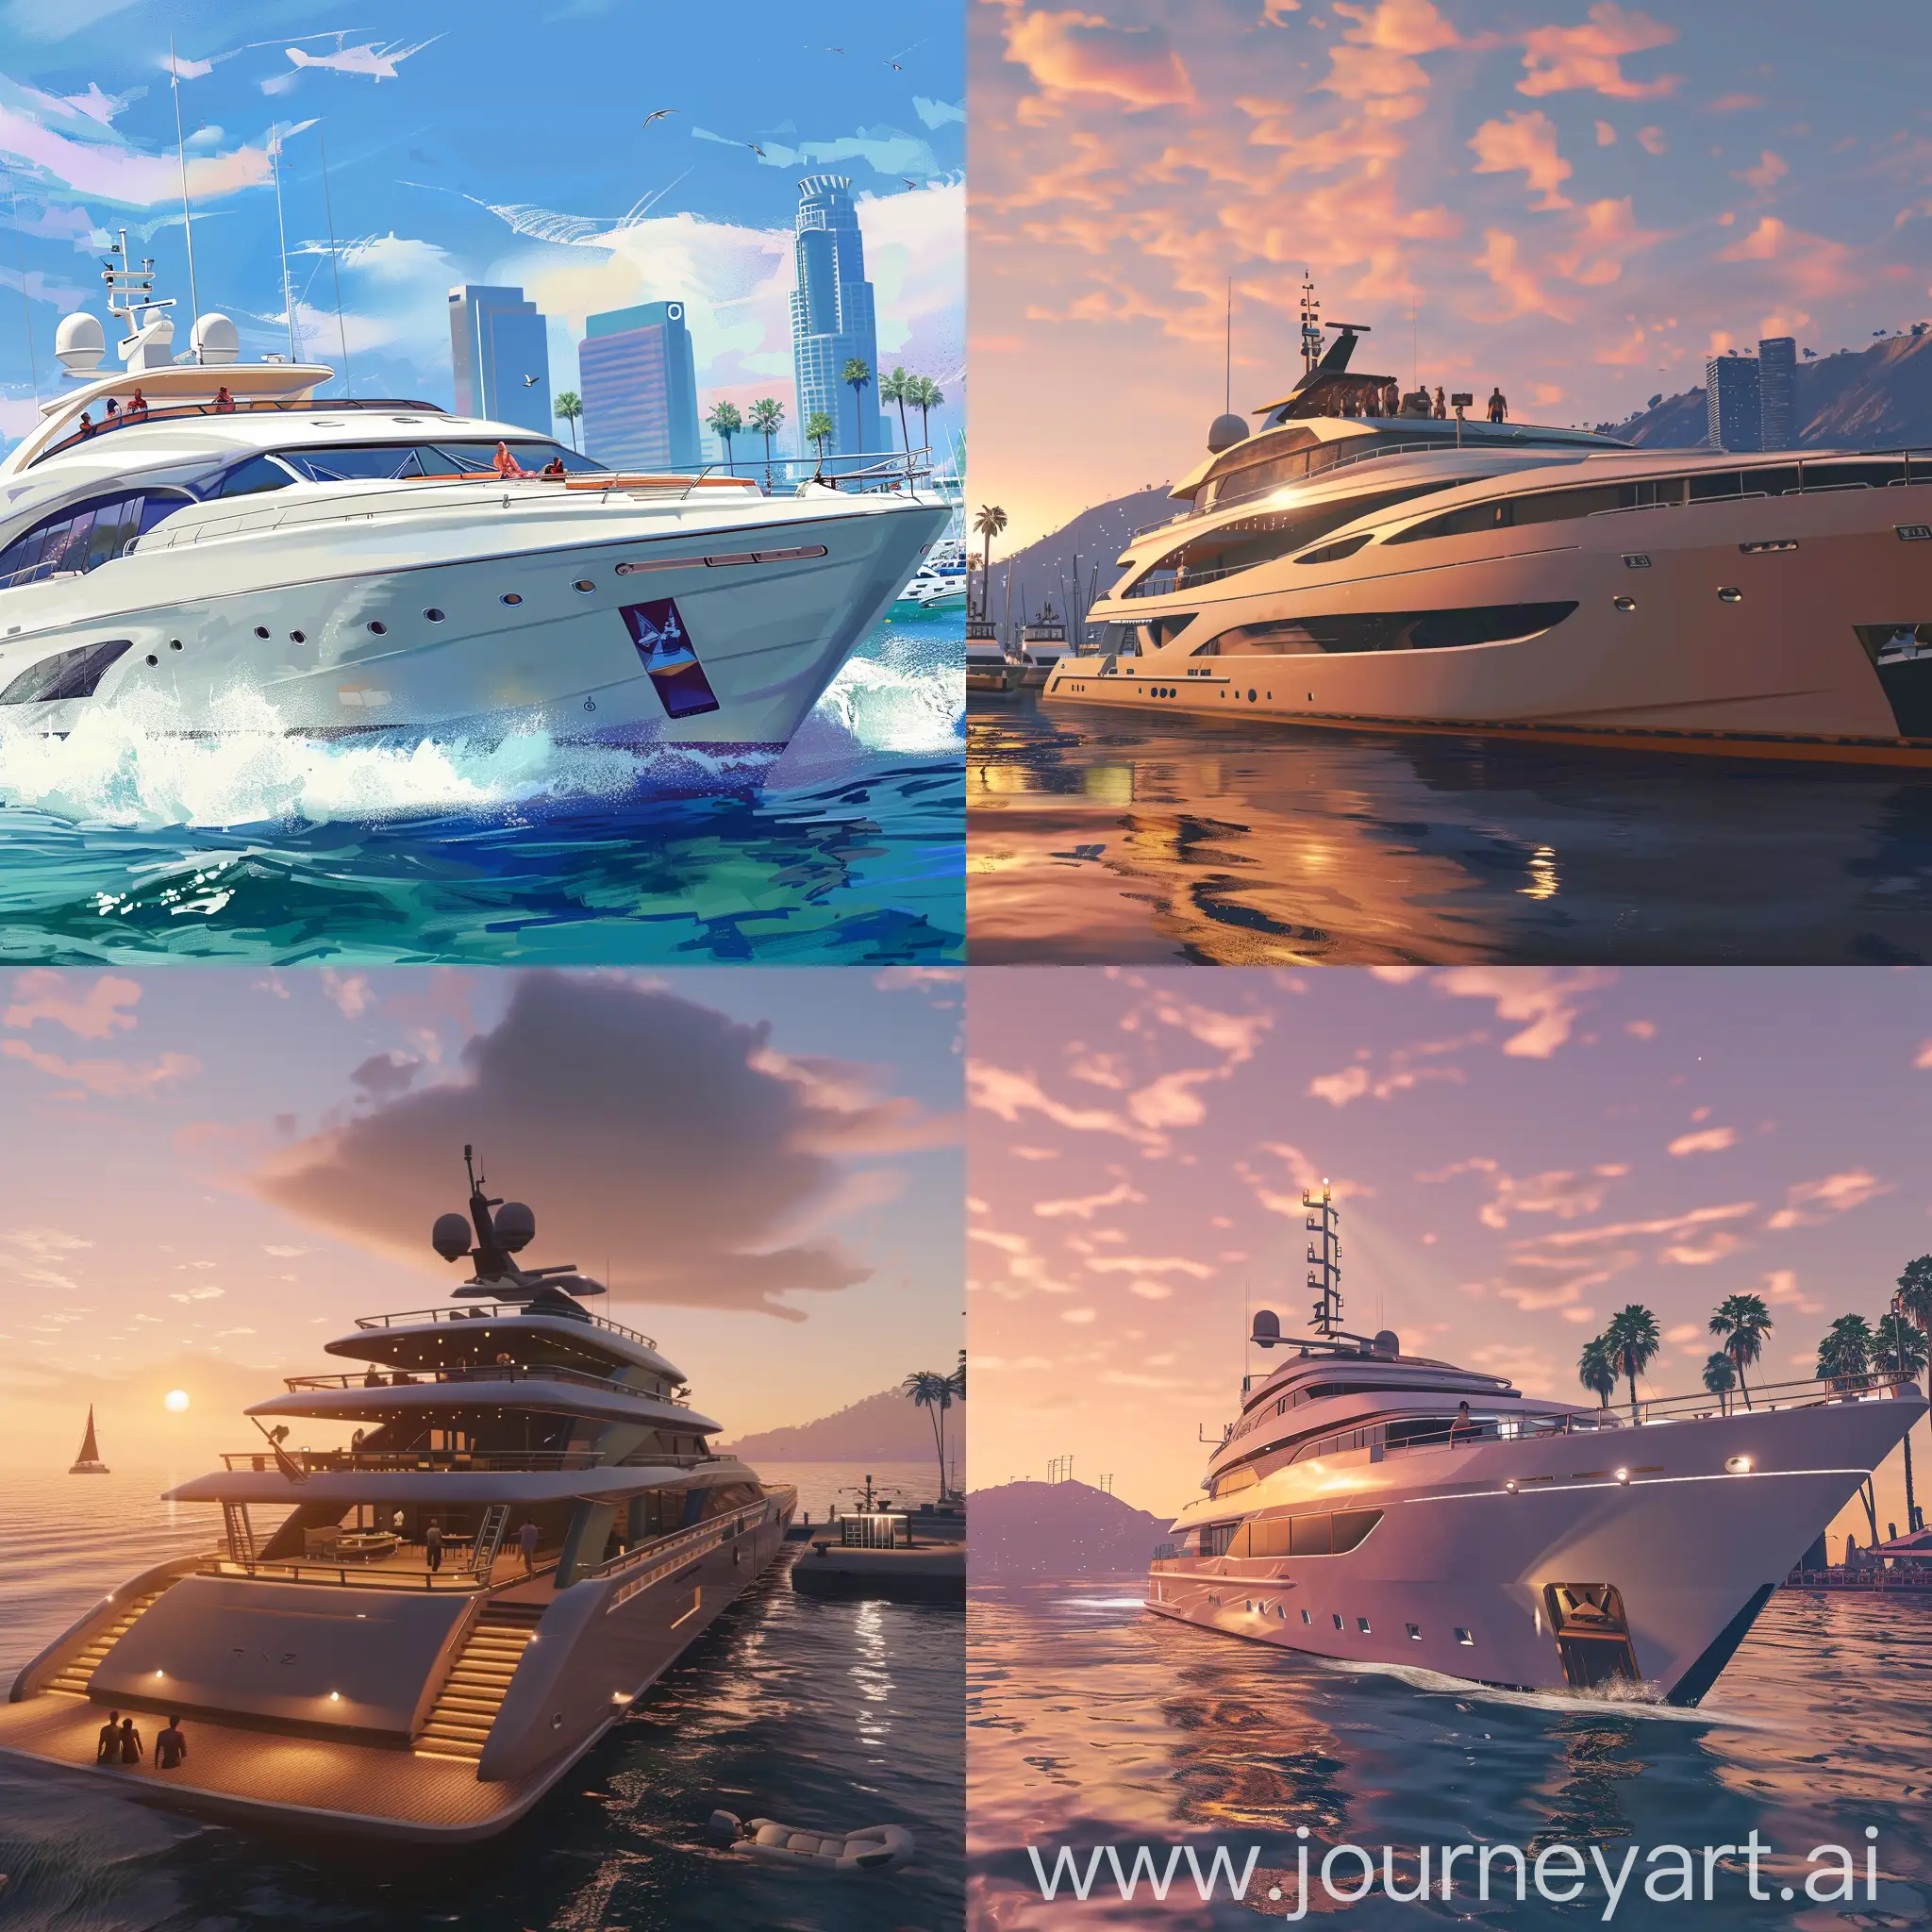 Luxury-Superyacht-Vacation-Scene-with-People-on-Deck